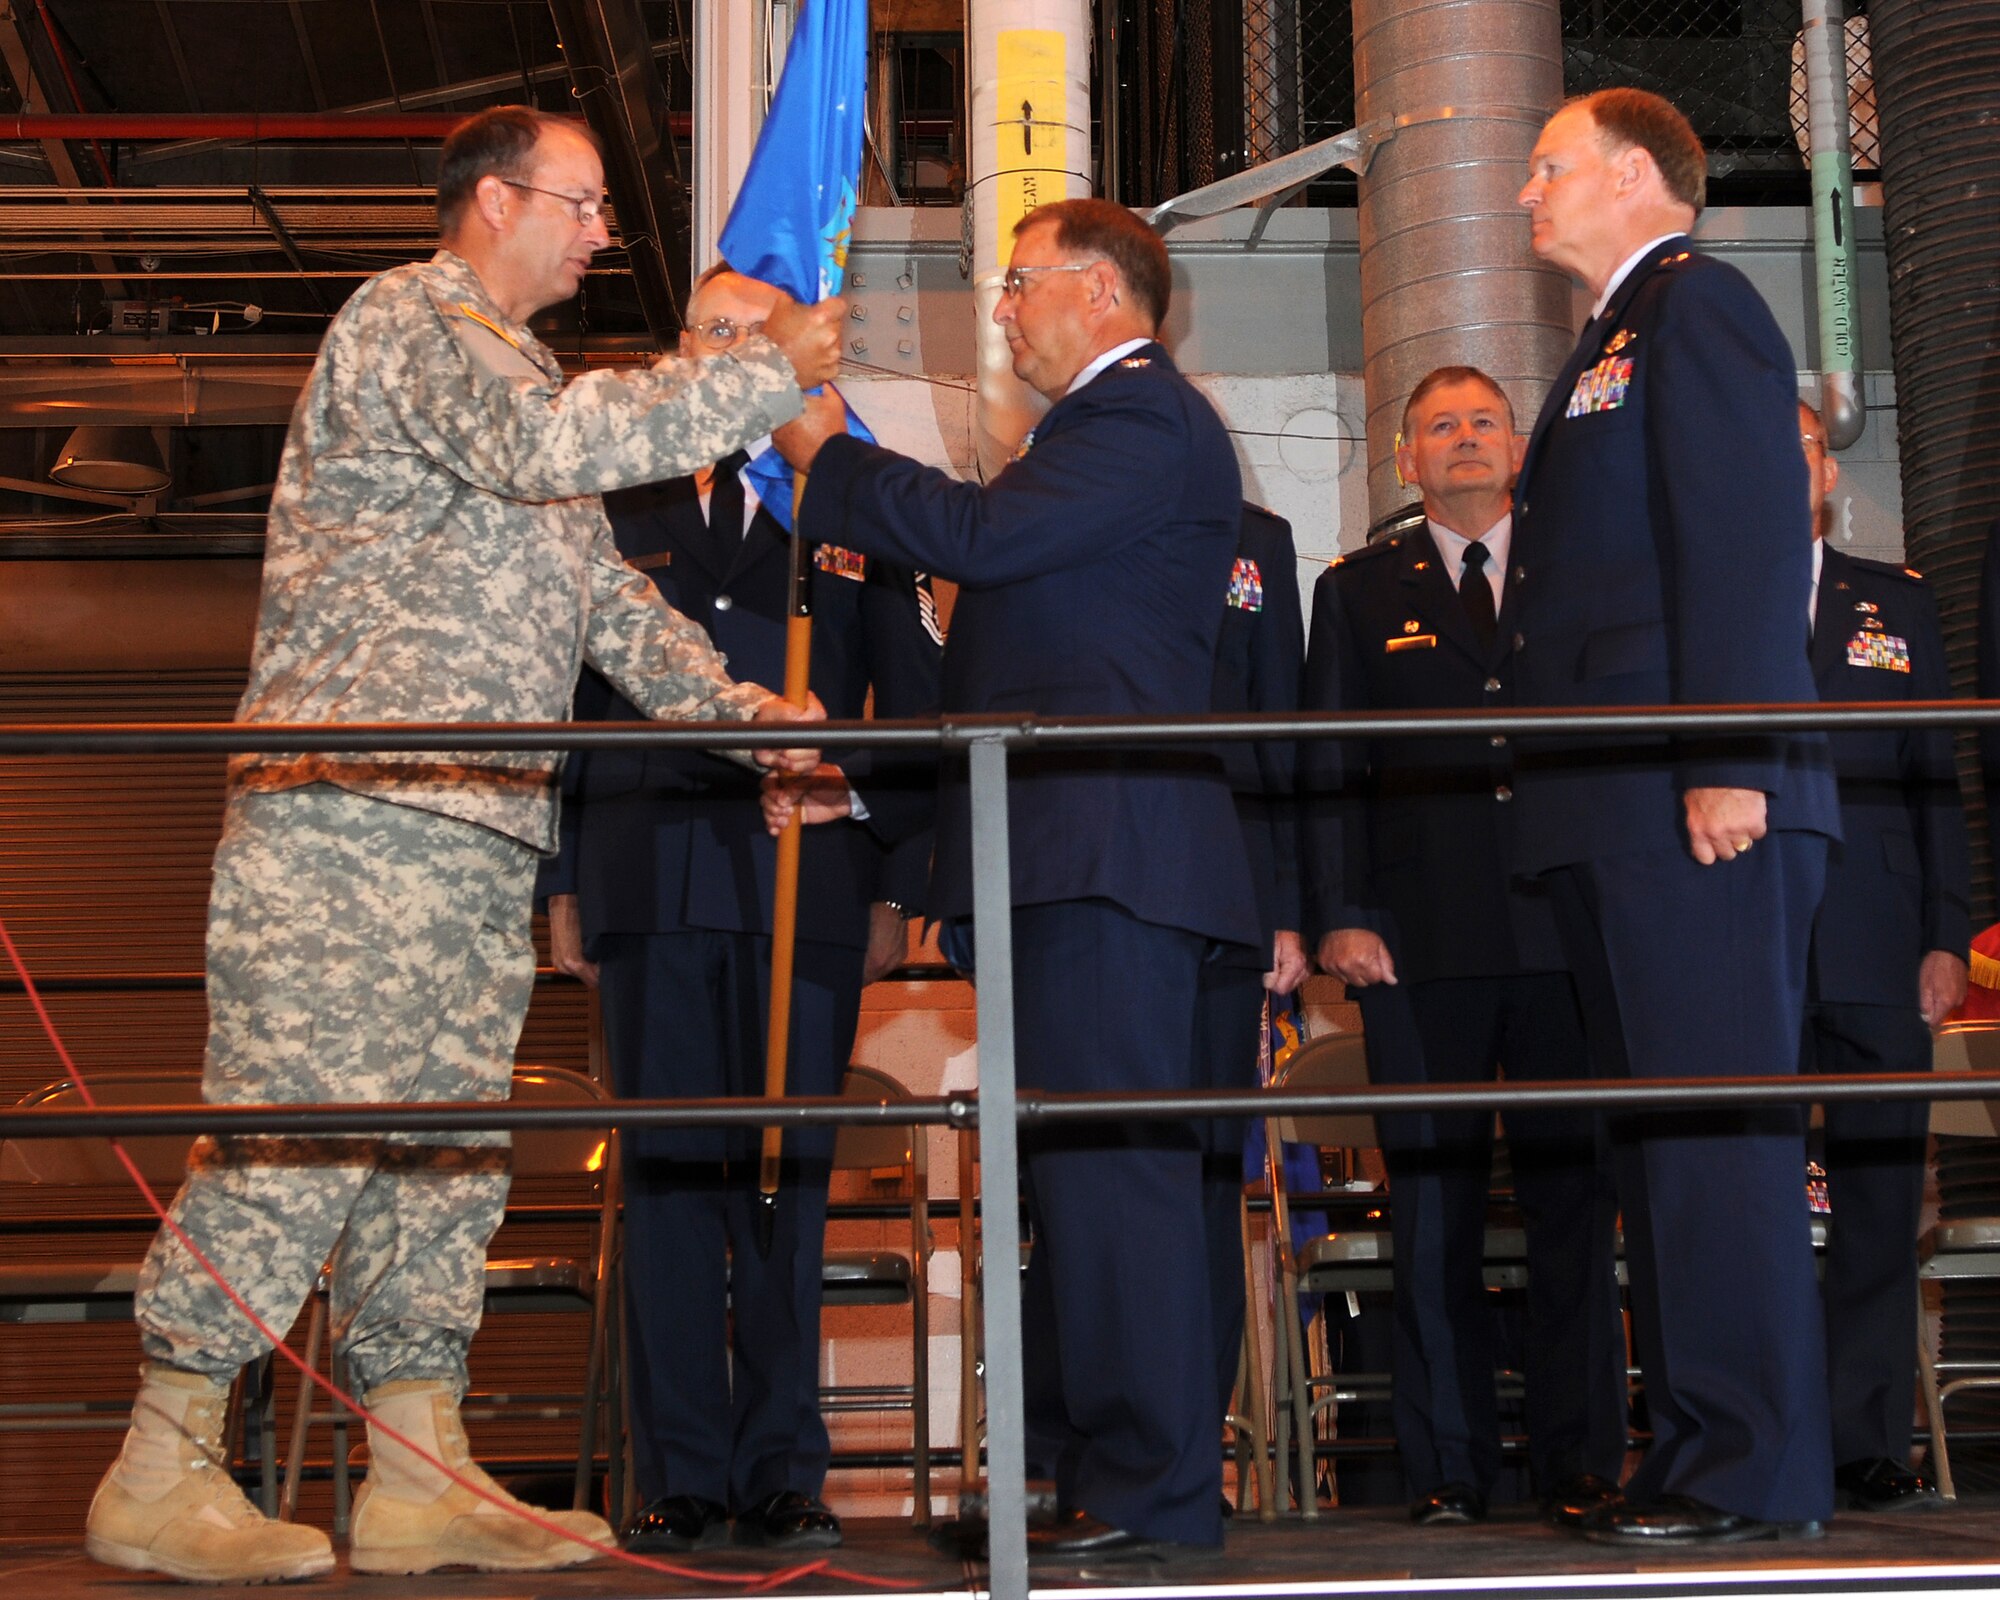 Major General Brian Tarbet, Adjutant General for the Utah National Guard, passes the flag to Colonel Wayne Lee, who assumed command as the Assistant Adjutant General of the Utah Air National Guard in a ceremony on July 10, 2010, at the 151st Air Refueling Wing, Salt Lake City. (U.S. Air Force photo by MSgt Gary J. Rihn) 	